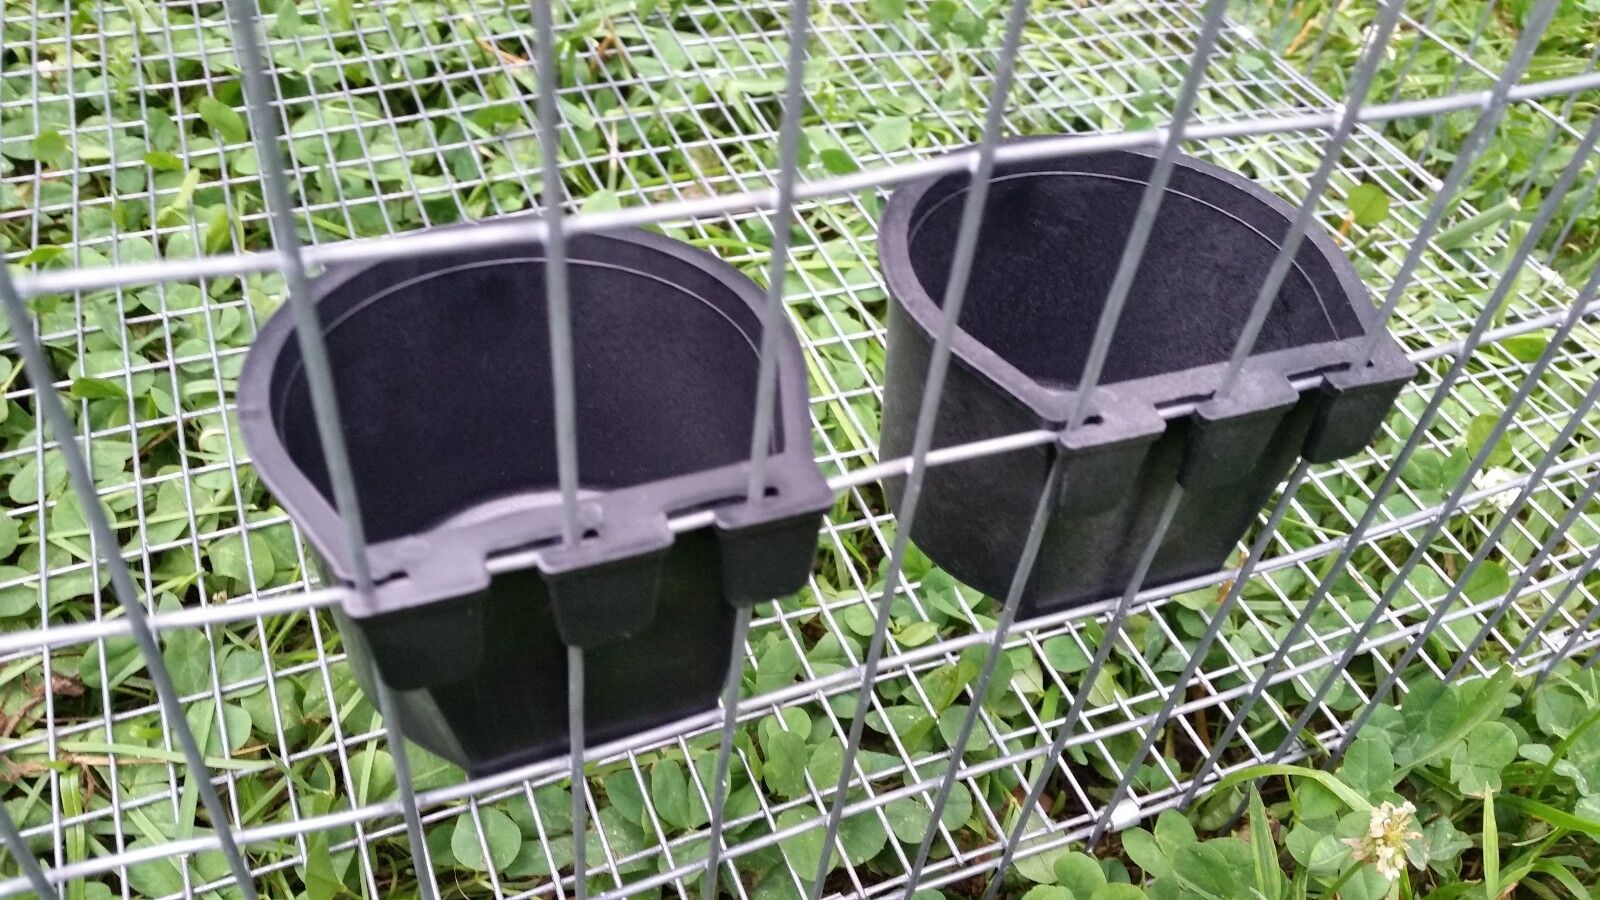 Set of 2 Feeder / Water Cups for Small Animal, Rabbit or Quail Wire Cages.   Game Bird Supply - фотография #2